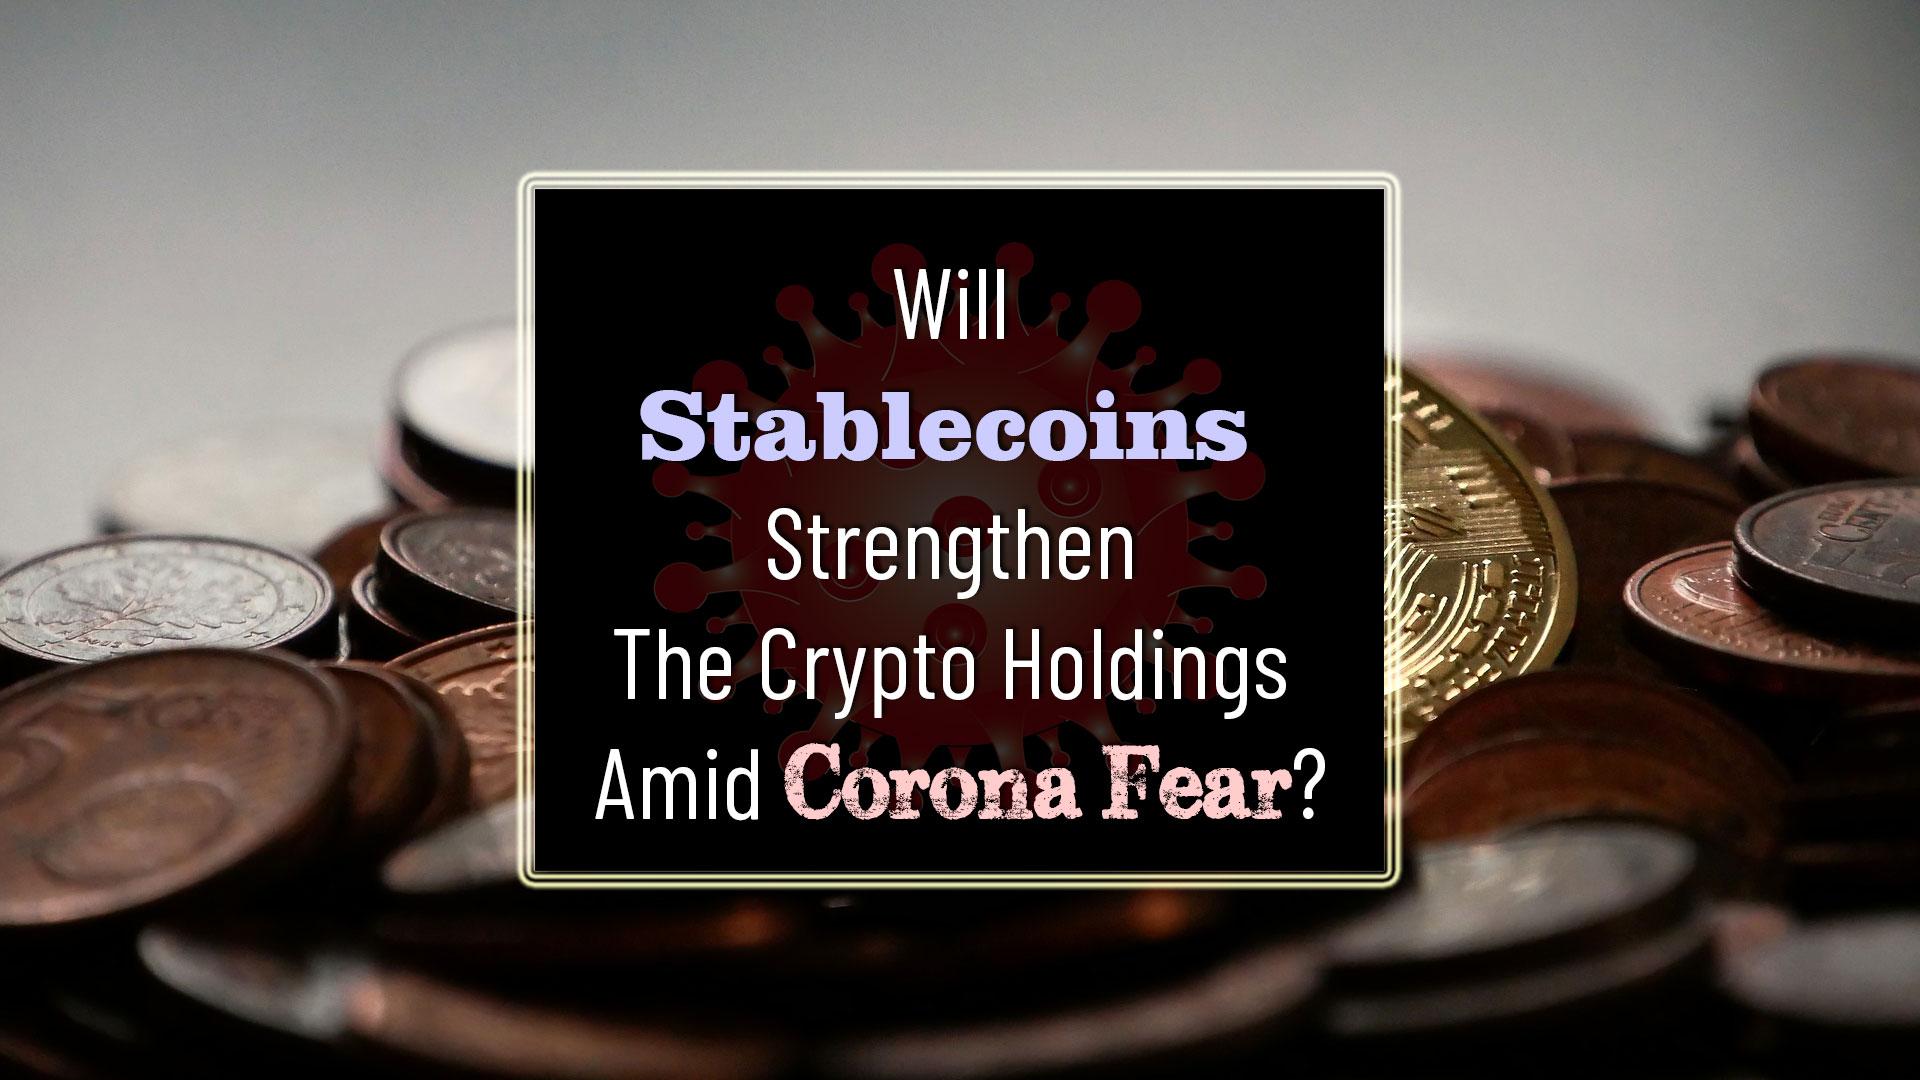 Will Stablecoins Strengthen The Crypto Holdings Amid Corona Fear?